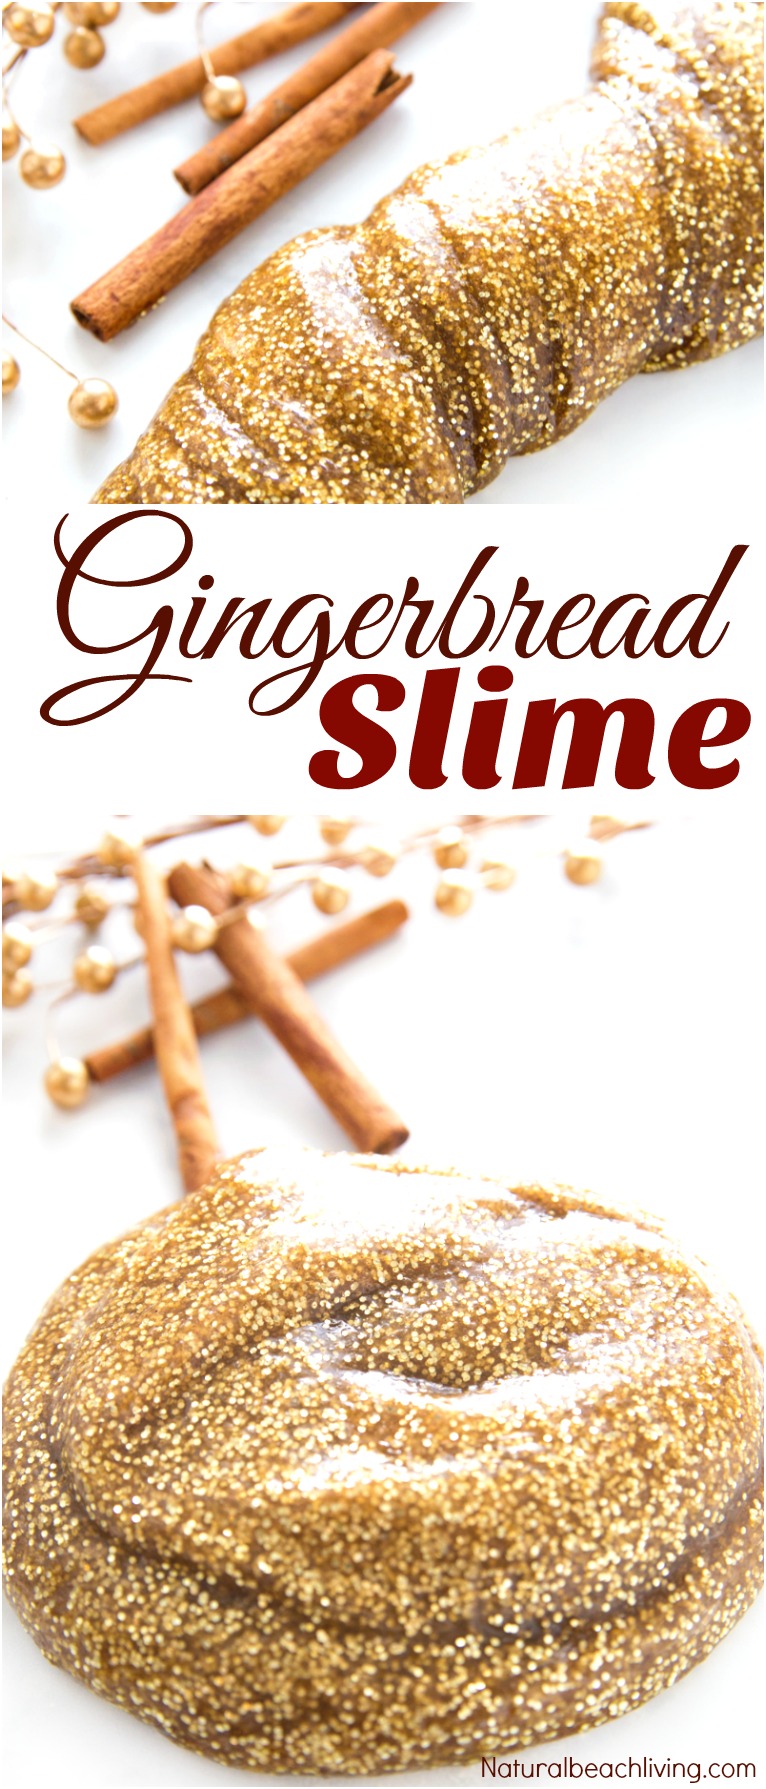 25+ Clear Slime Recipe Ideas, including how to make clear slime and slime videos, you can learn about slime science, find clear slime recipe without borax, clear slime recipe with contact solution and so many FUN homemade slime recipes like the #1 Gingerbread Slime 